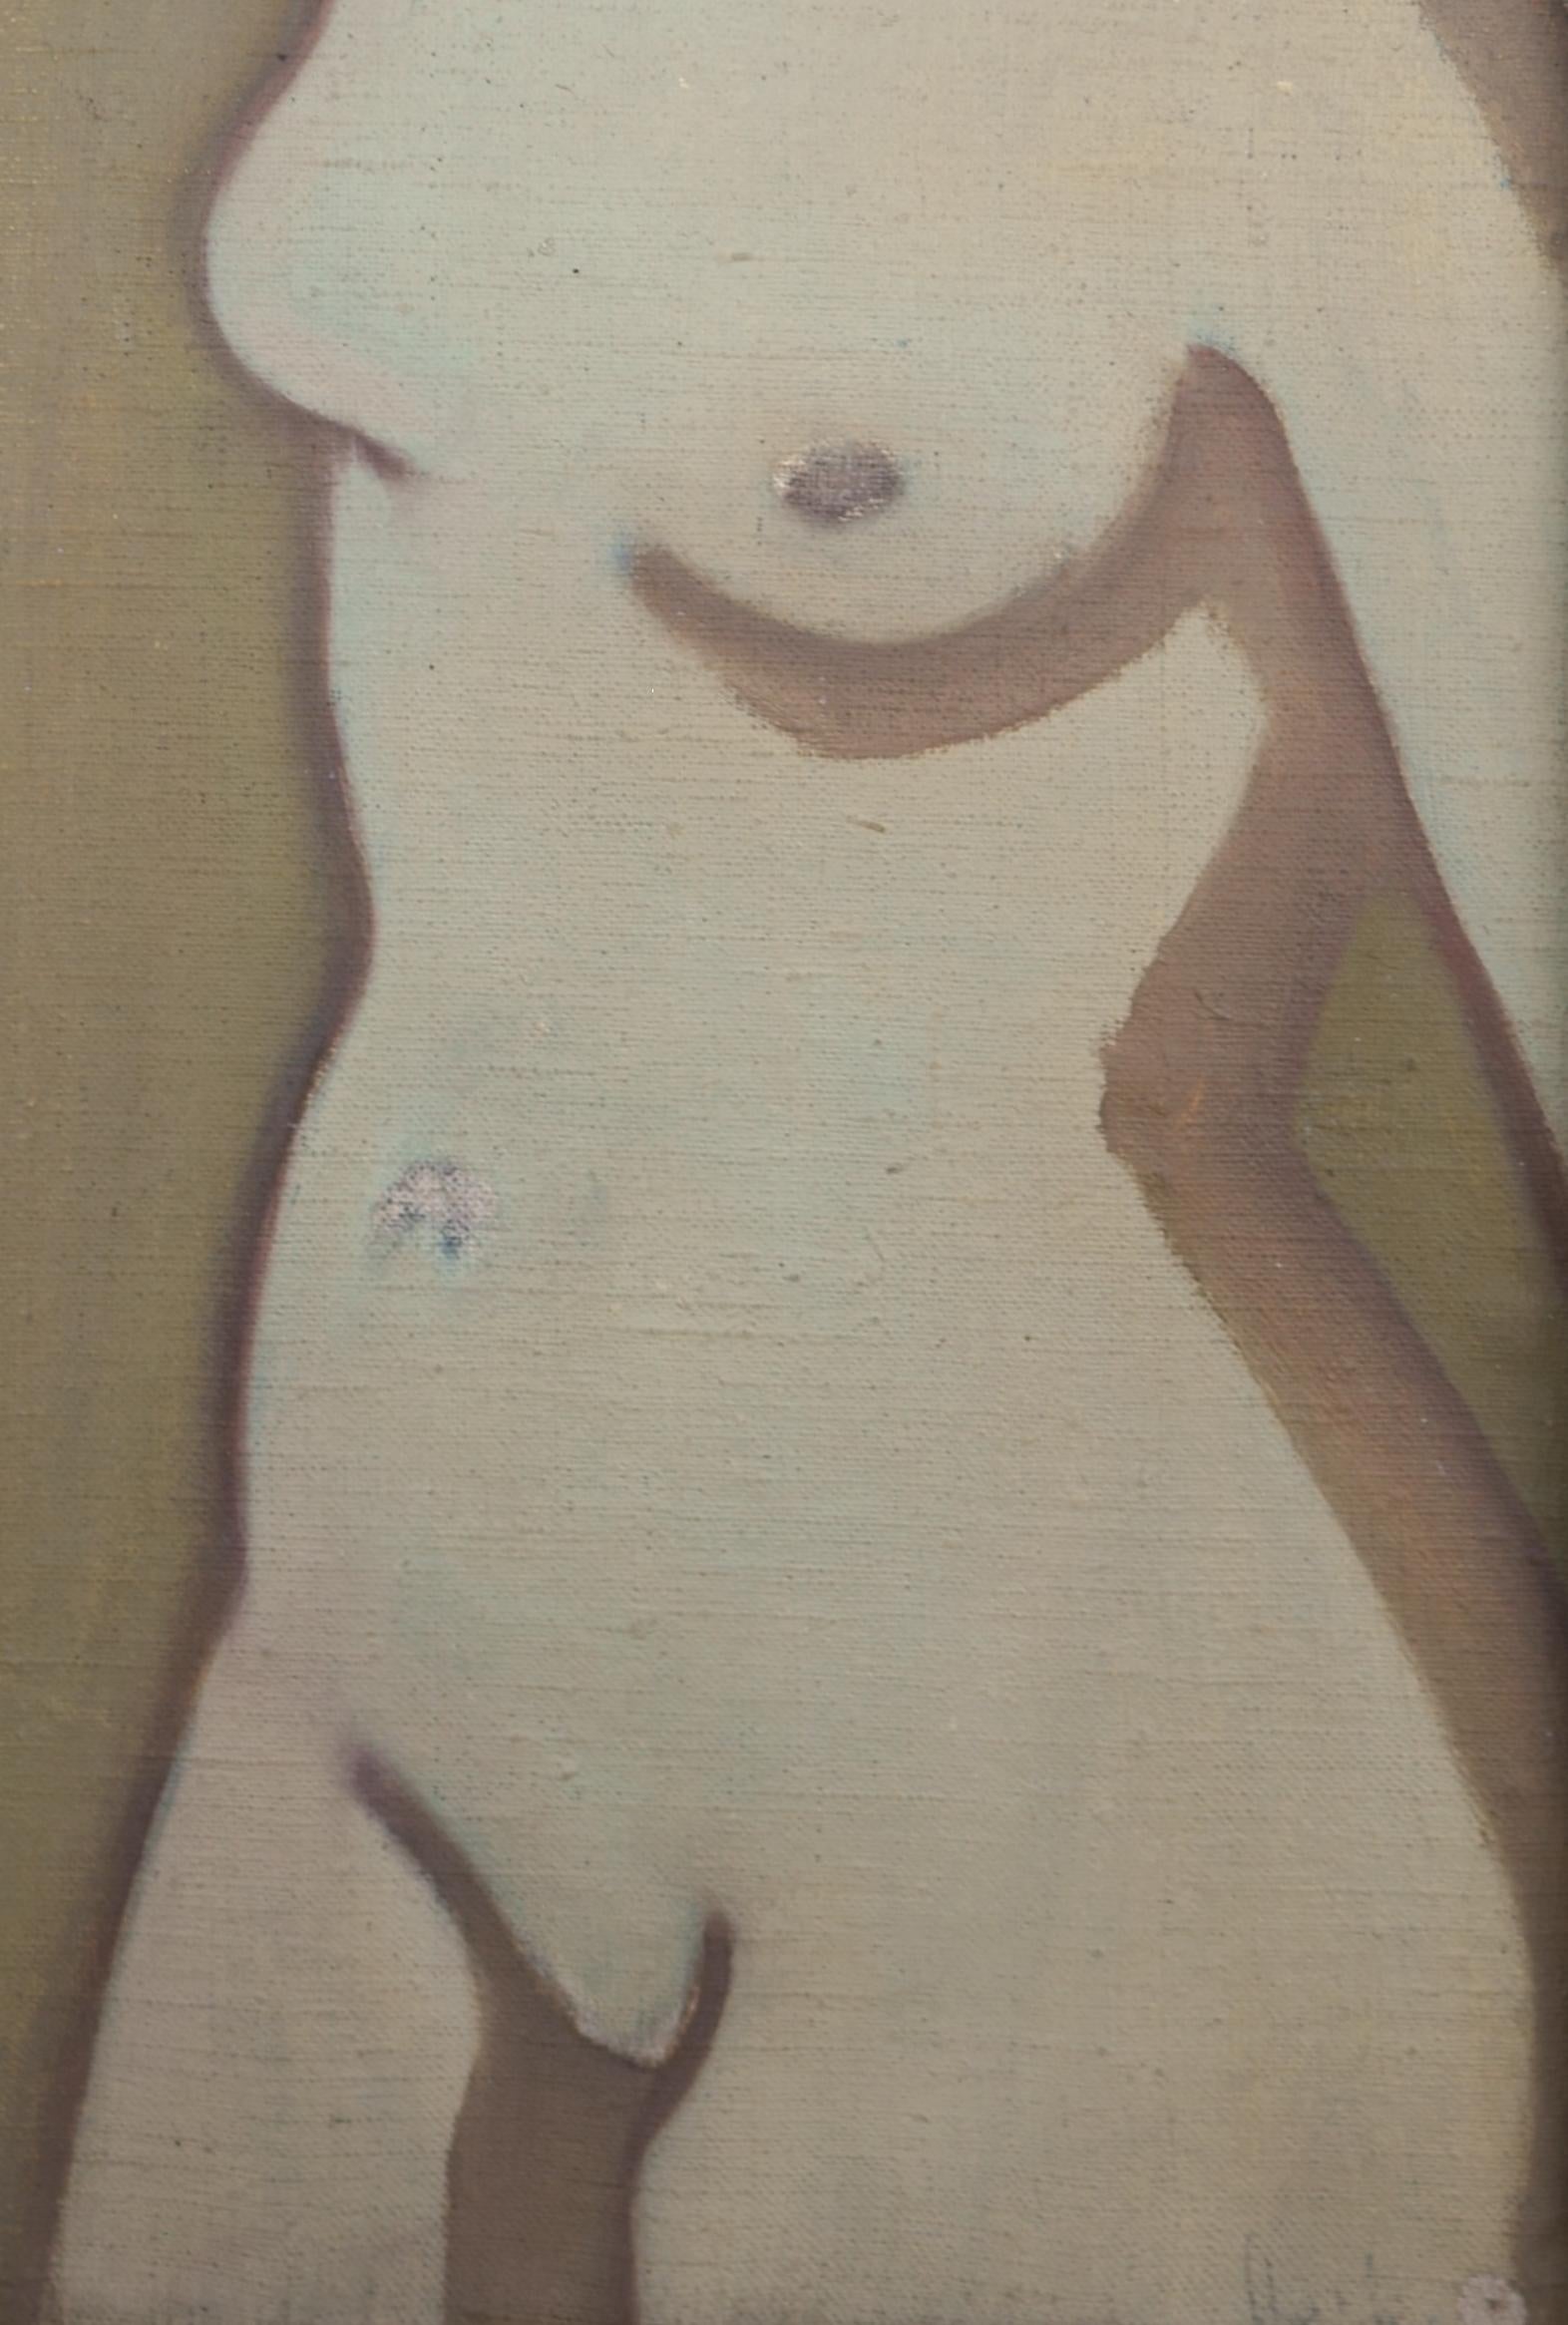 Small Nude / - Abstract Figurativity - - Realist Painting by Gustl Stark